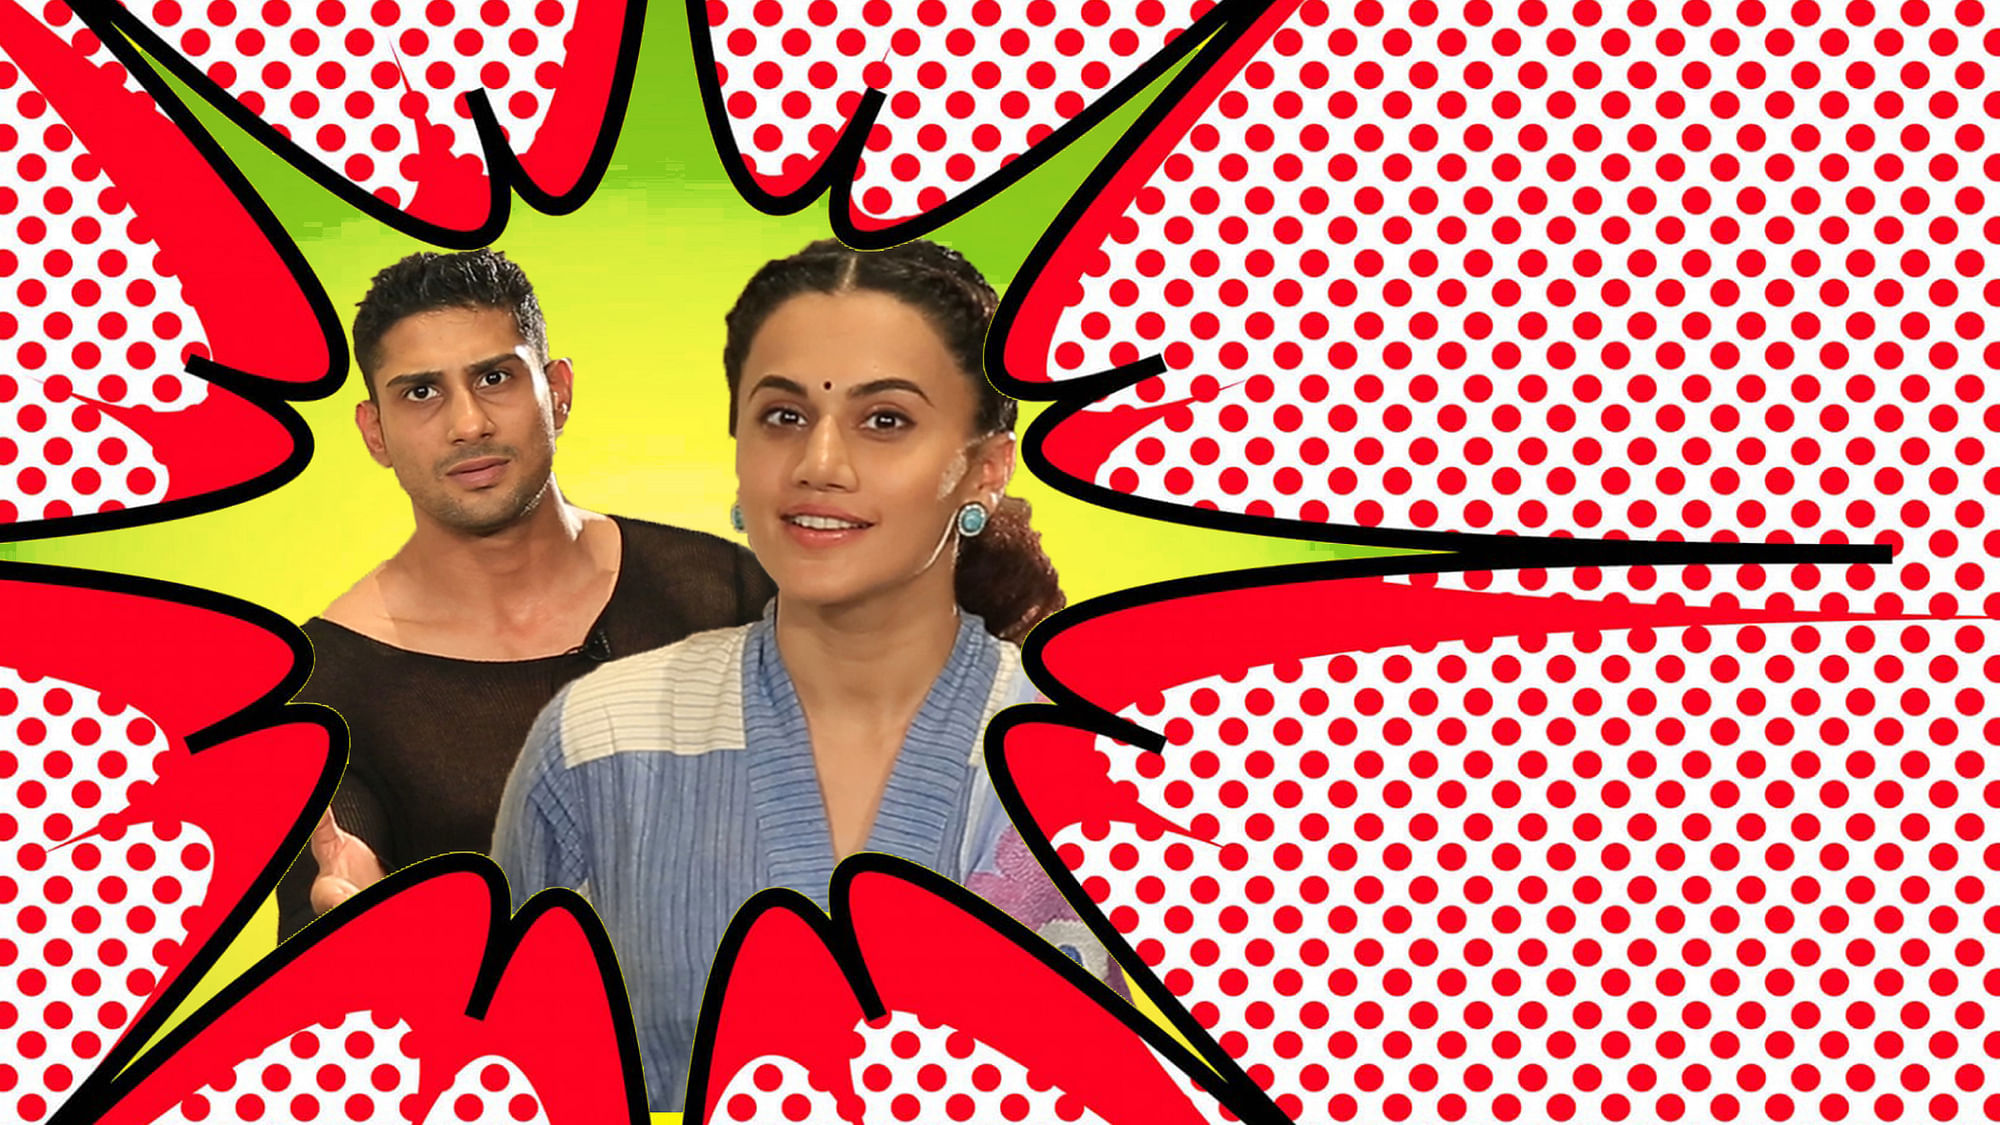 Tapsee Pannu and Prateik Babbar shoot with <i>The Quint</i>.